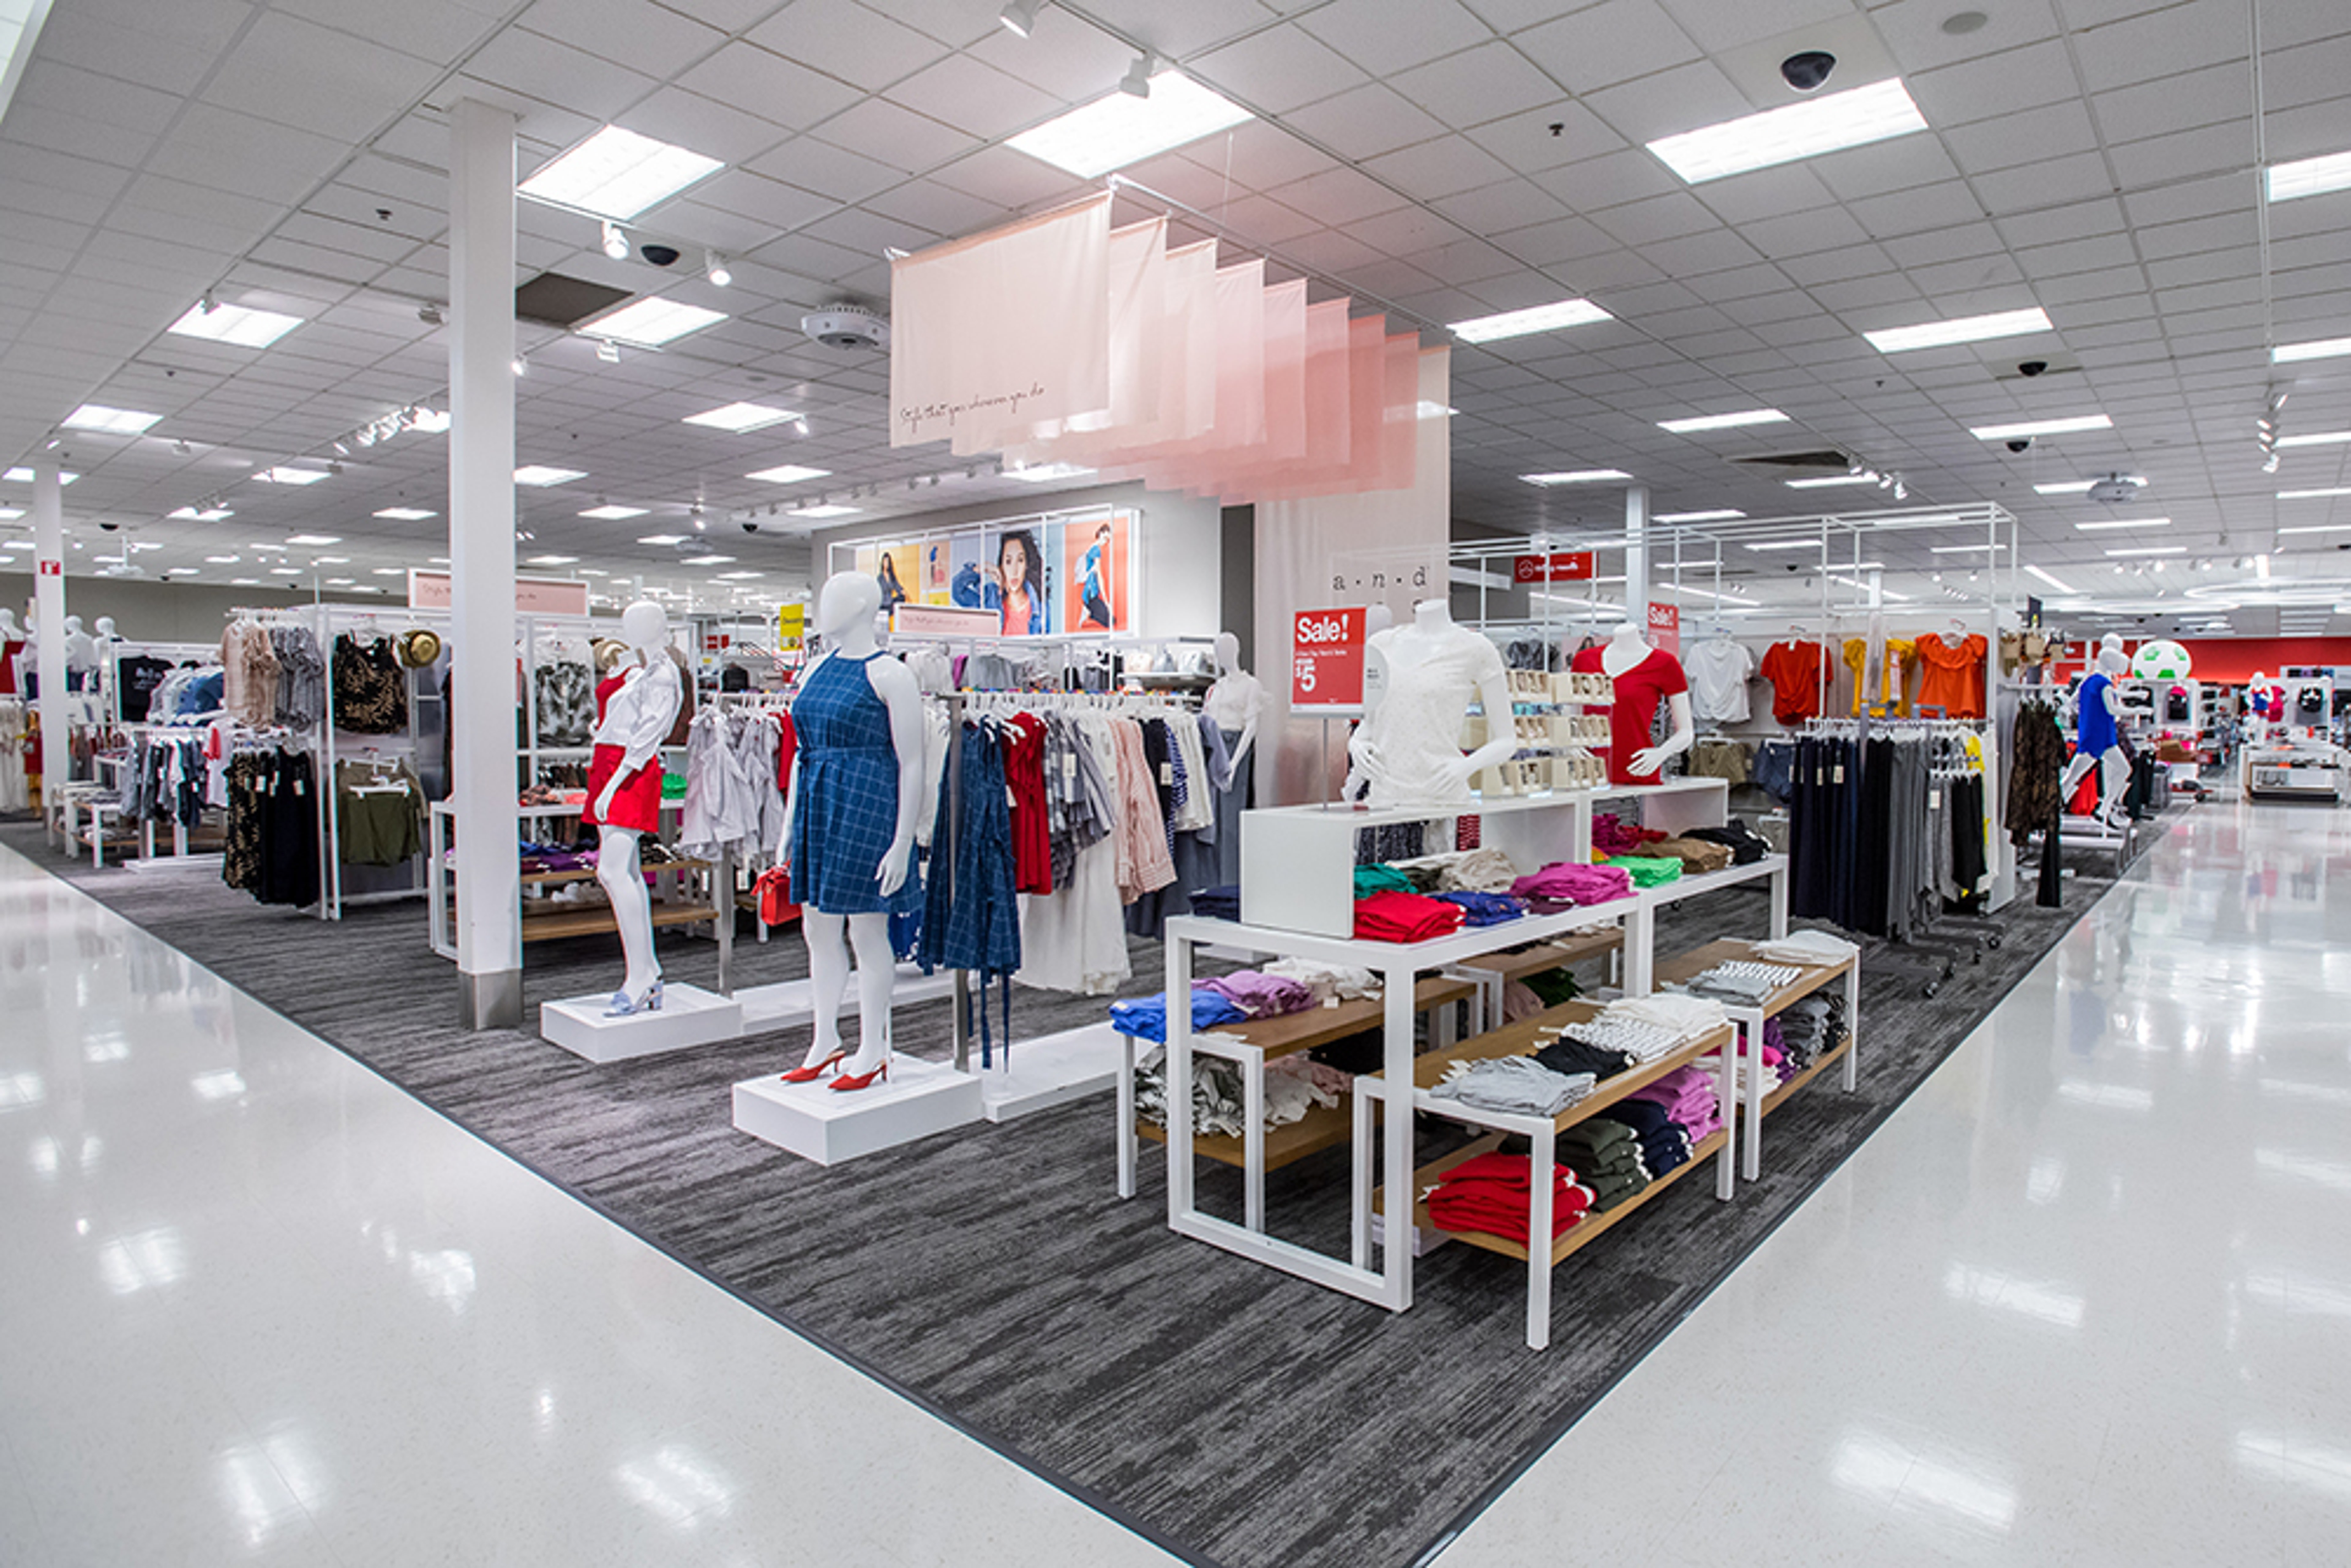 Retail Earnings Preview: What To Expect From Target, TJX Companies And Walmart This Week